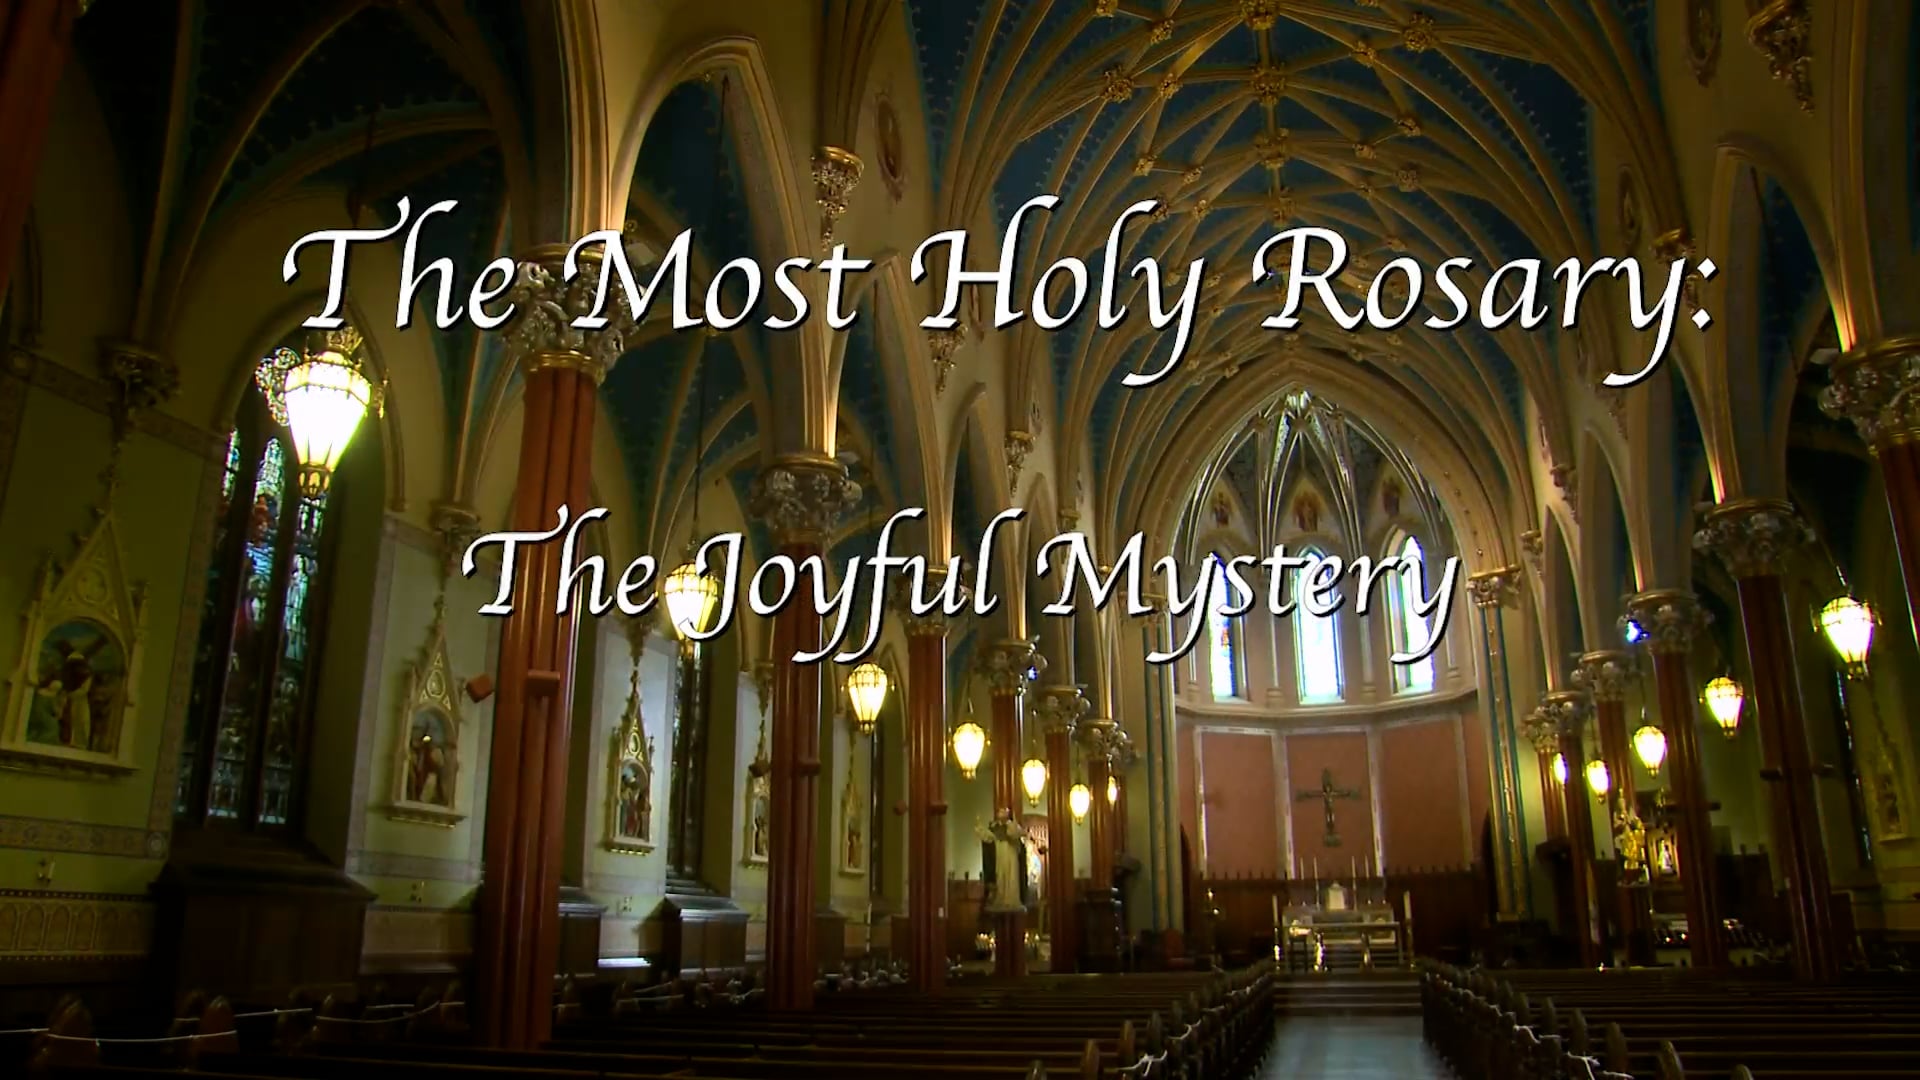 The Rosary: The Joyful Mysteries led by Bishop John Barres